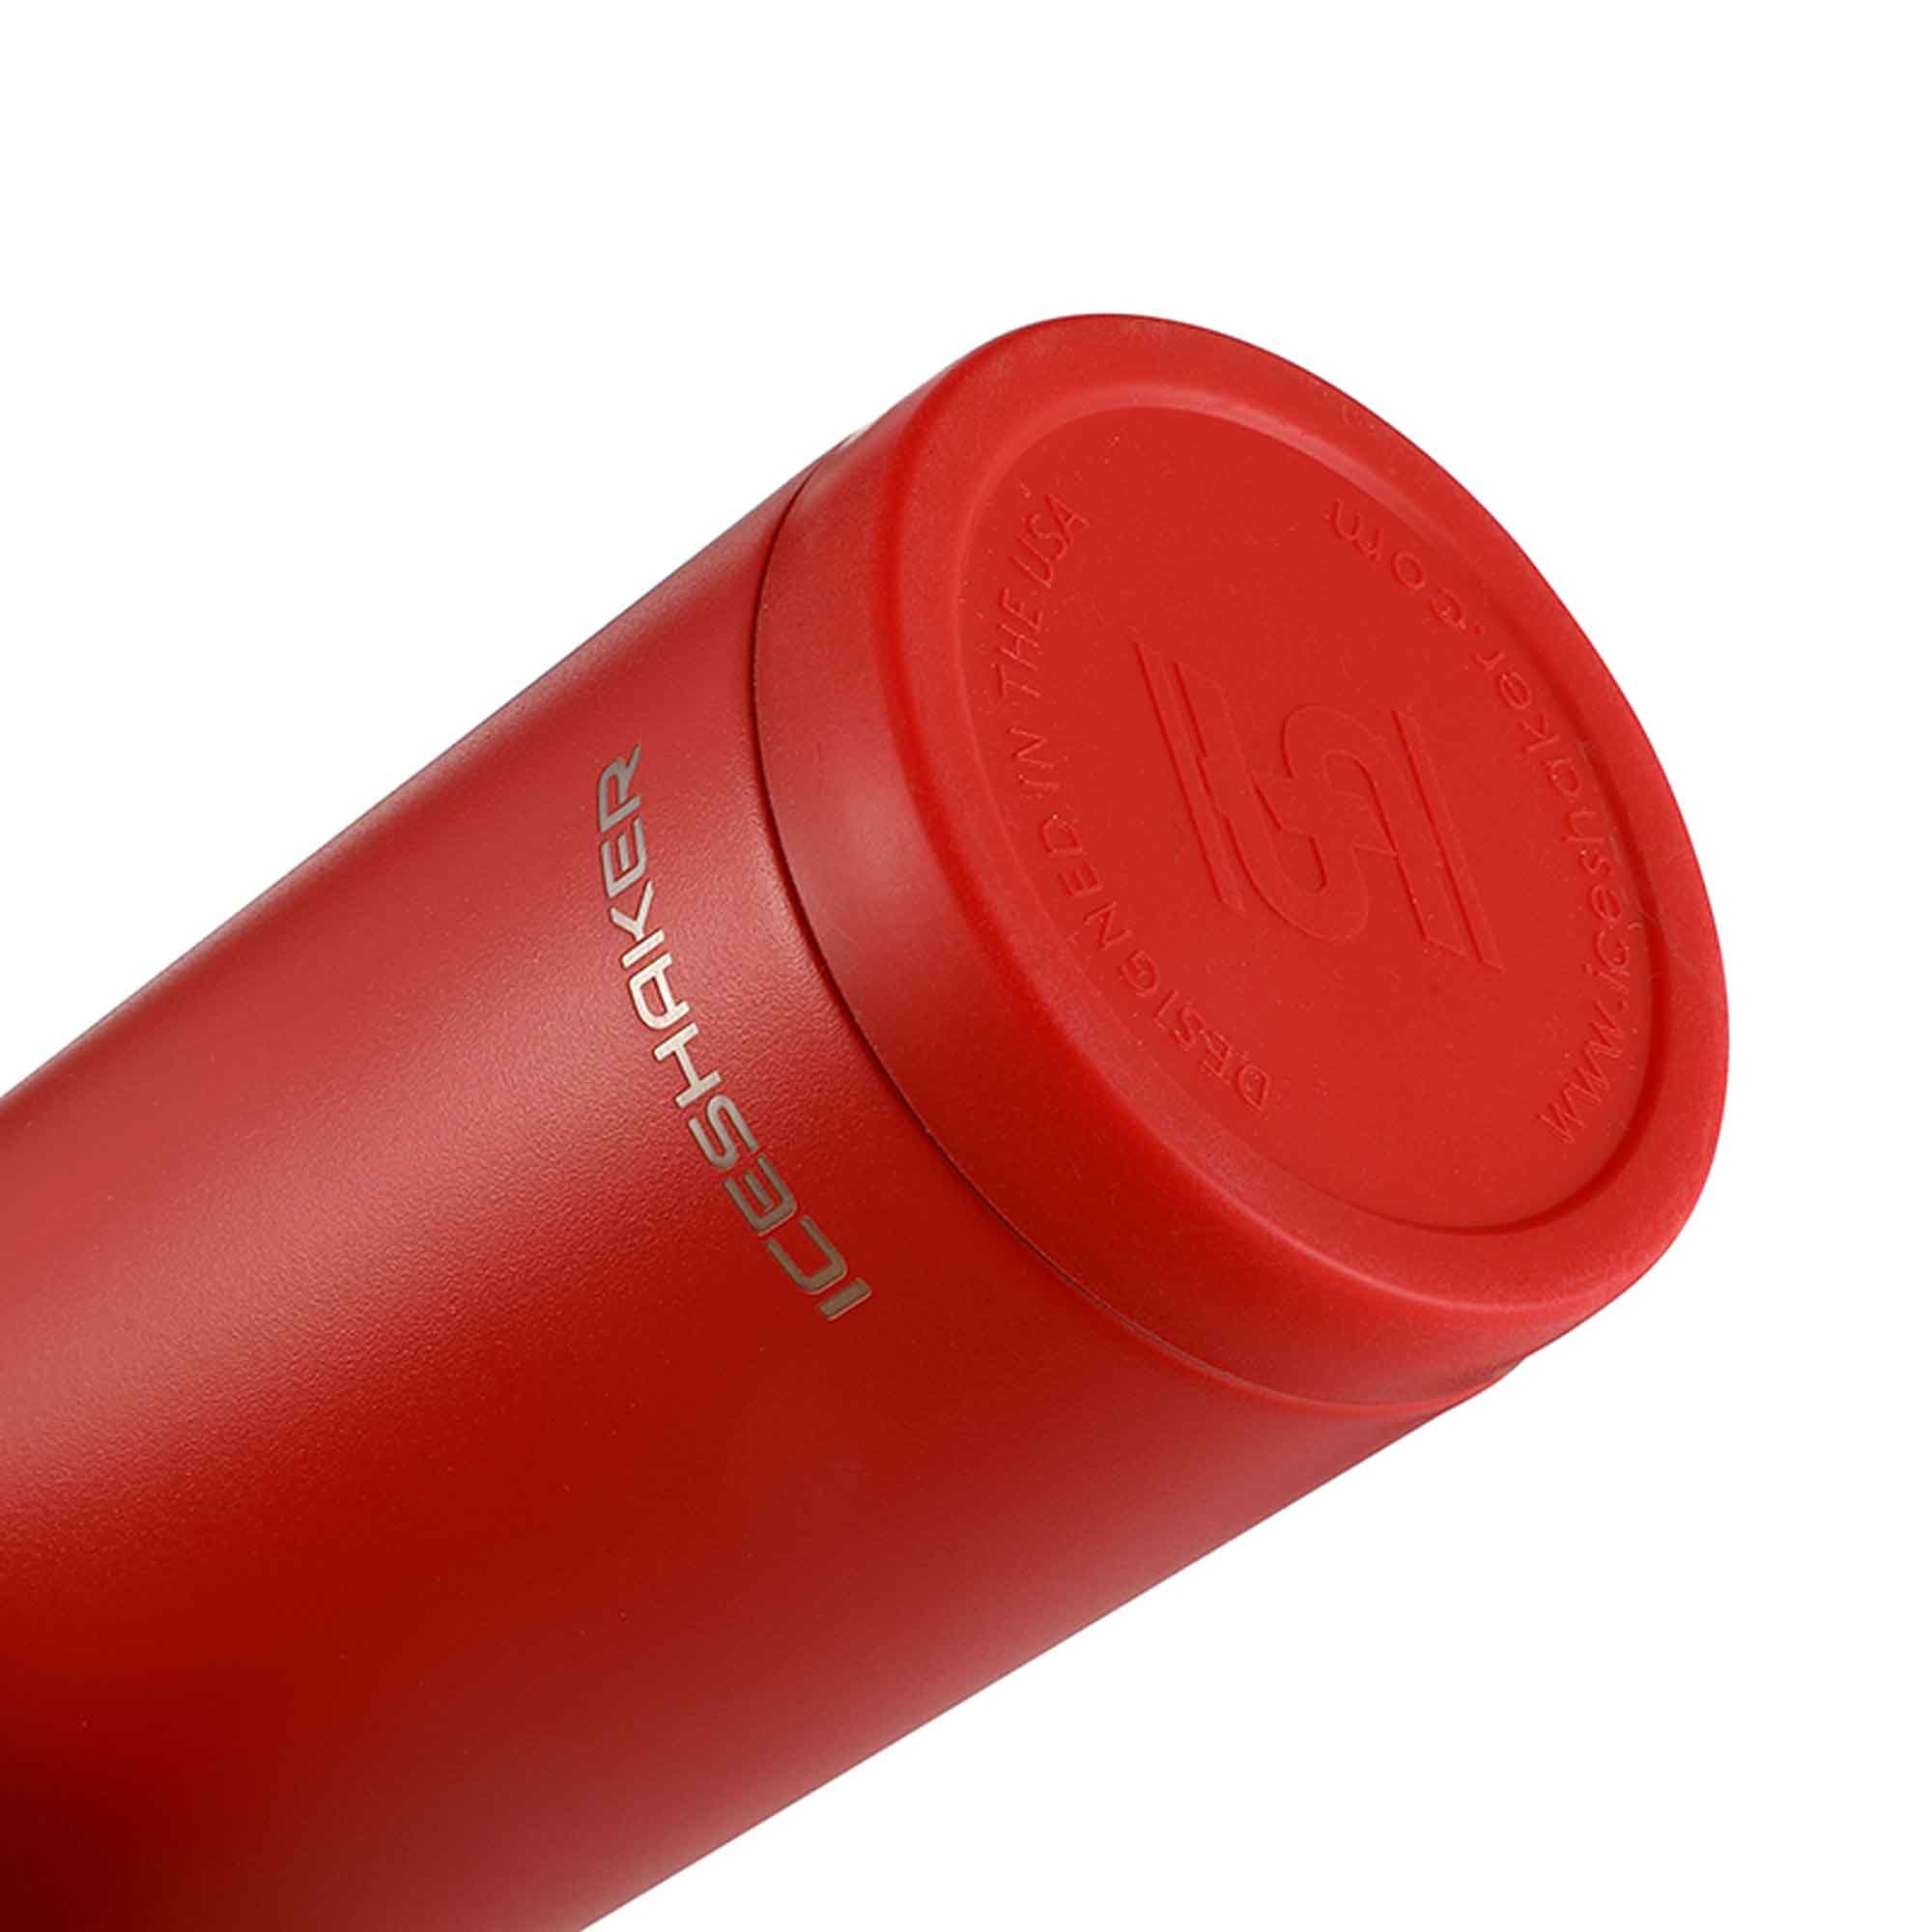 EcoVessel Silicone Bottle Bumper - 74mm Fits Most Bottles Smaller Than 32 oz, Jazz Red